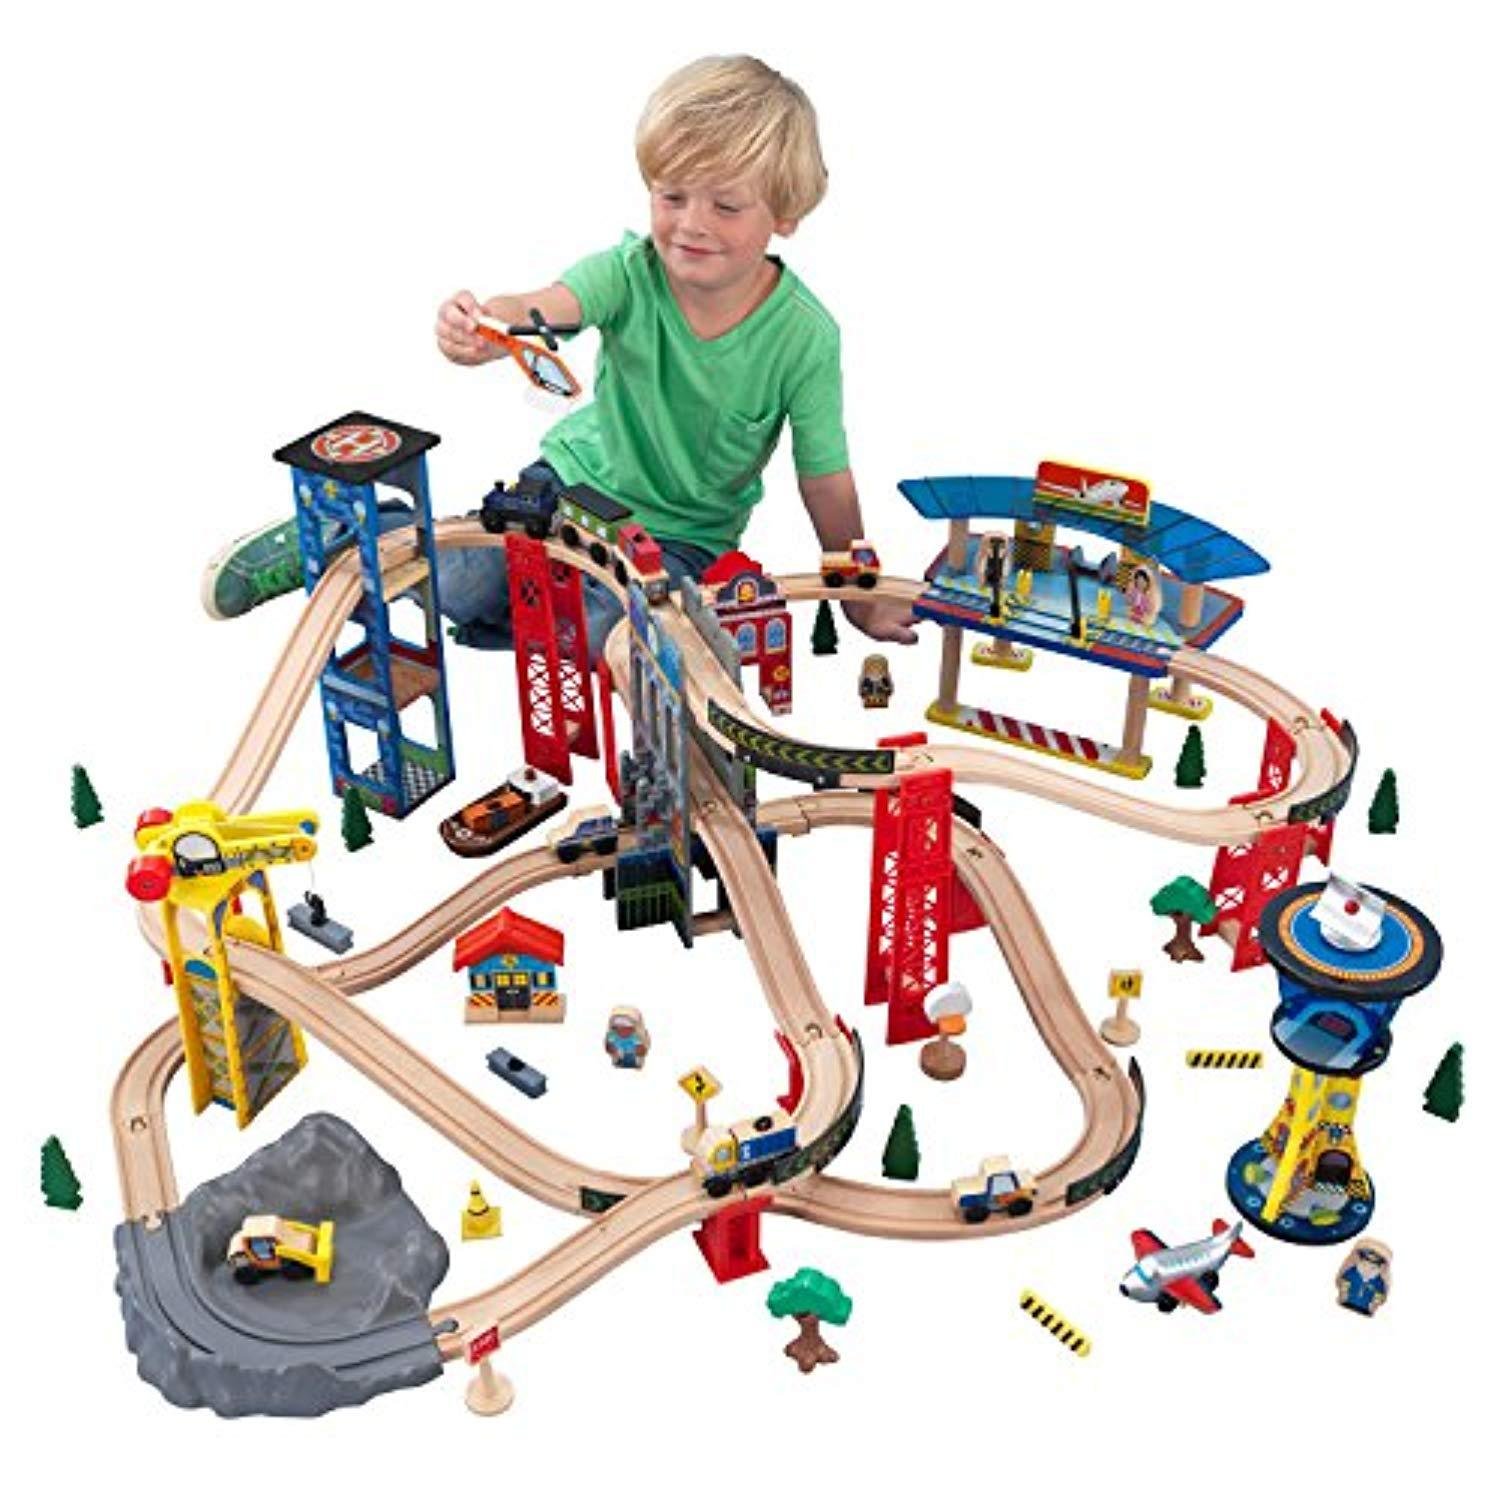 Online Train Toys Store. If your kids loves trains, browse our site, y'all have fun! ...https://t.co/AFjRcXzzeB